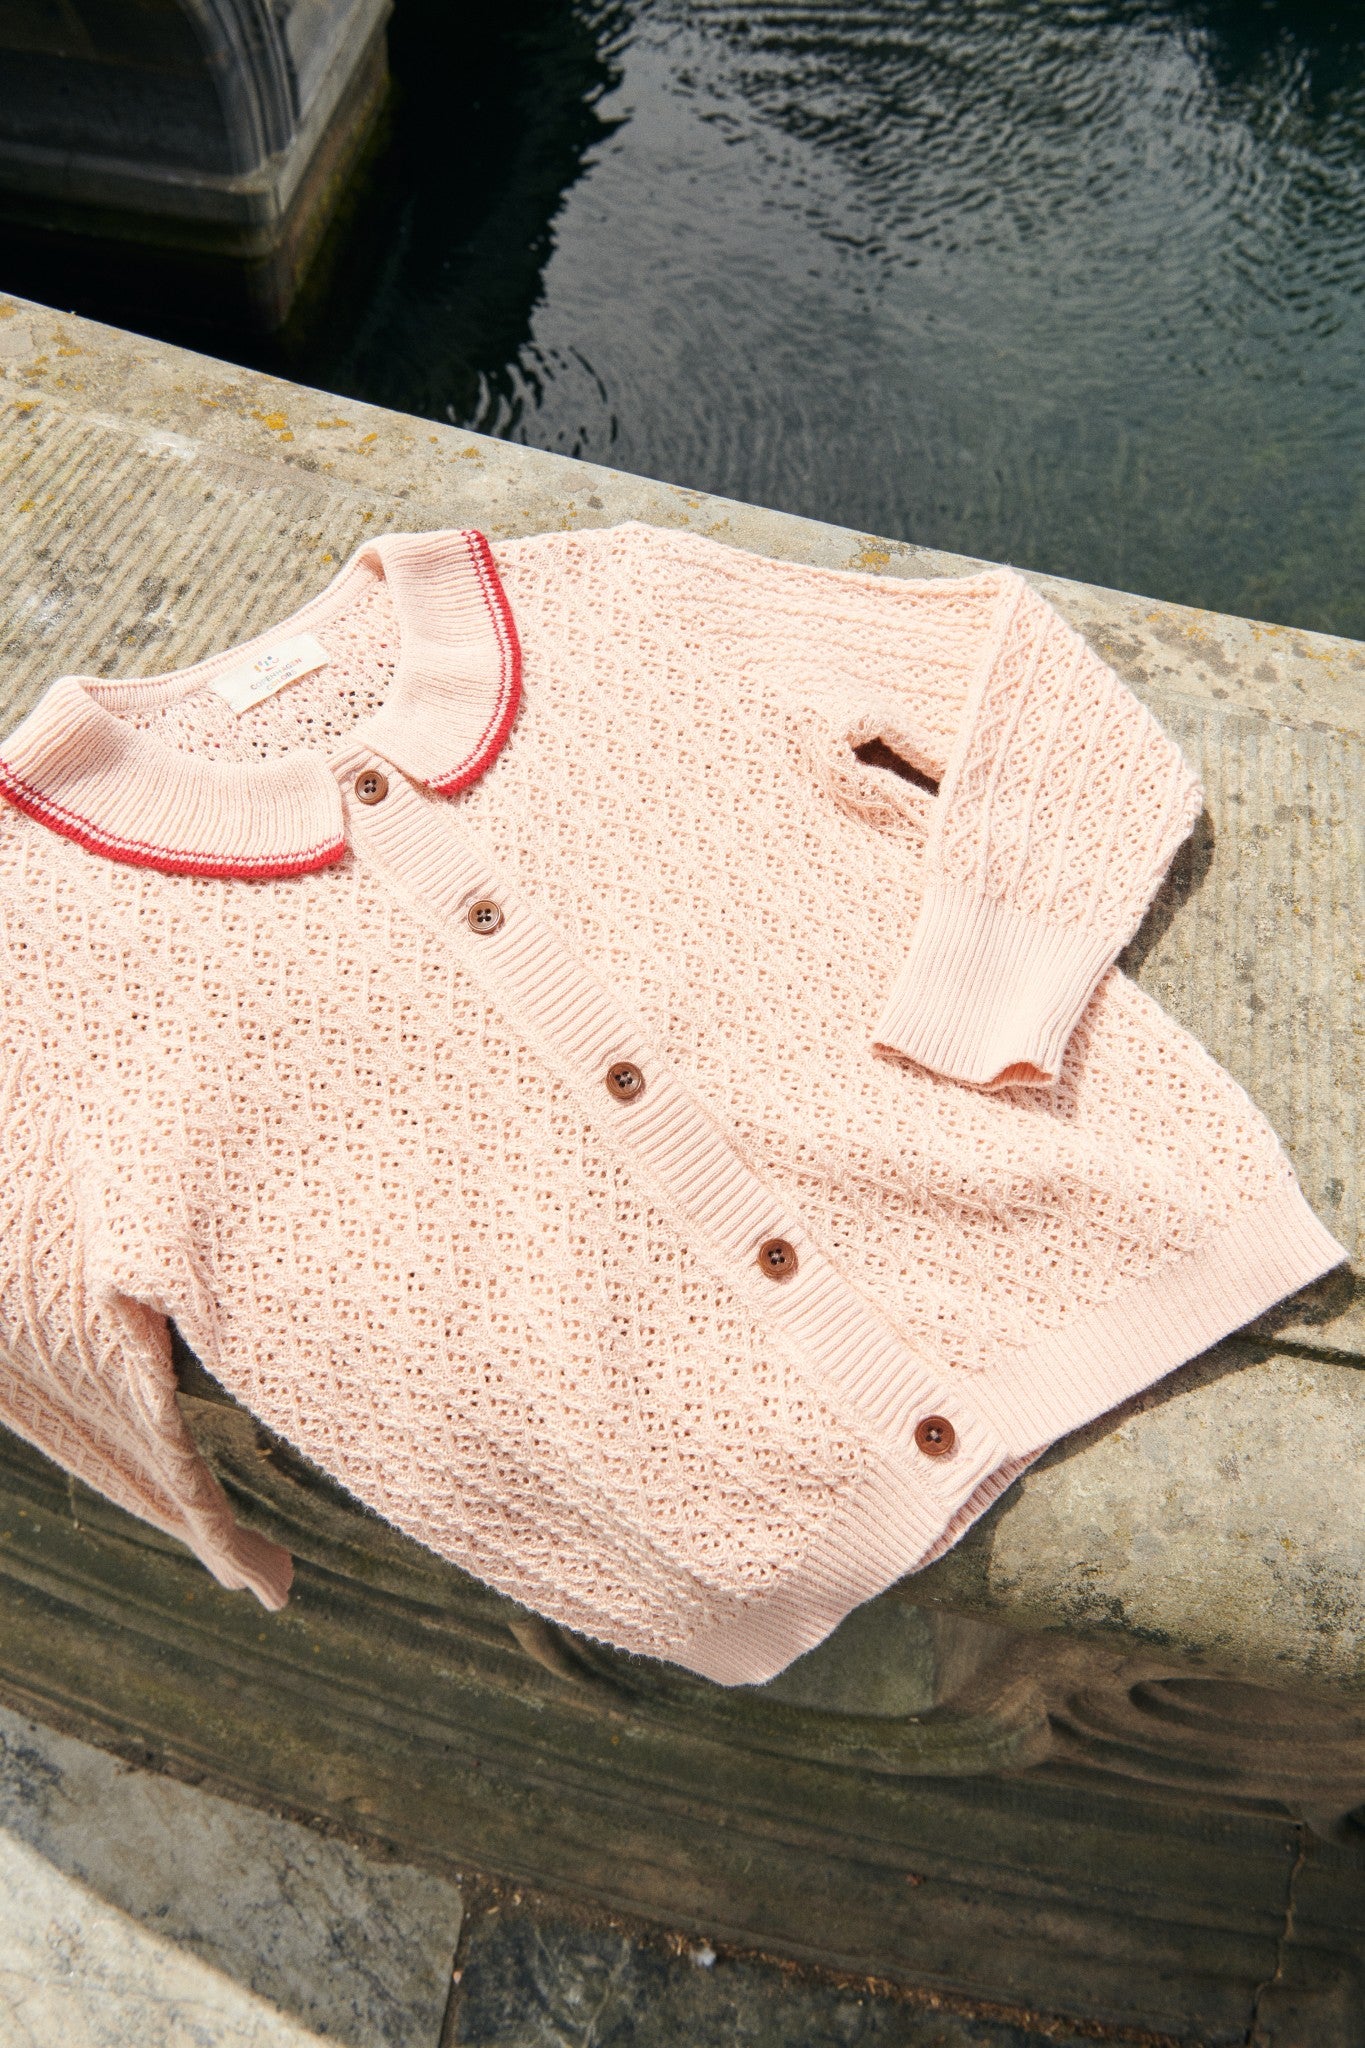 POINTELLE KNITTED CABLE CARDIGAN W. COLLAR - DUSTY ROSE/RED COMB.